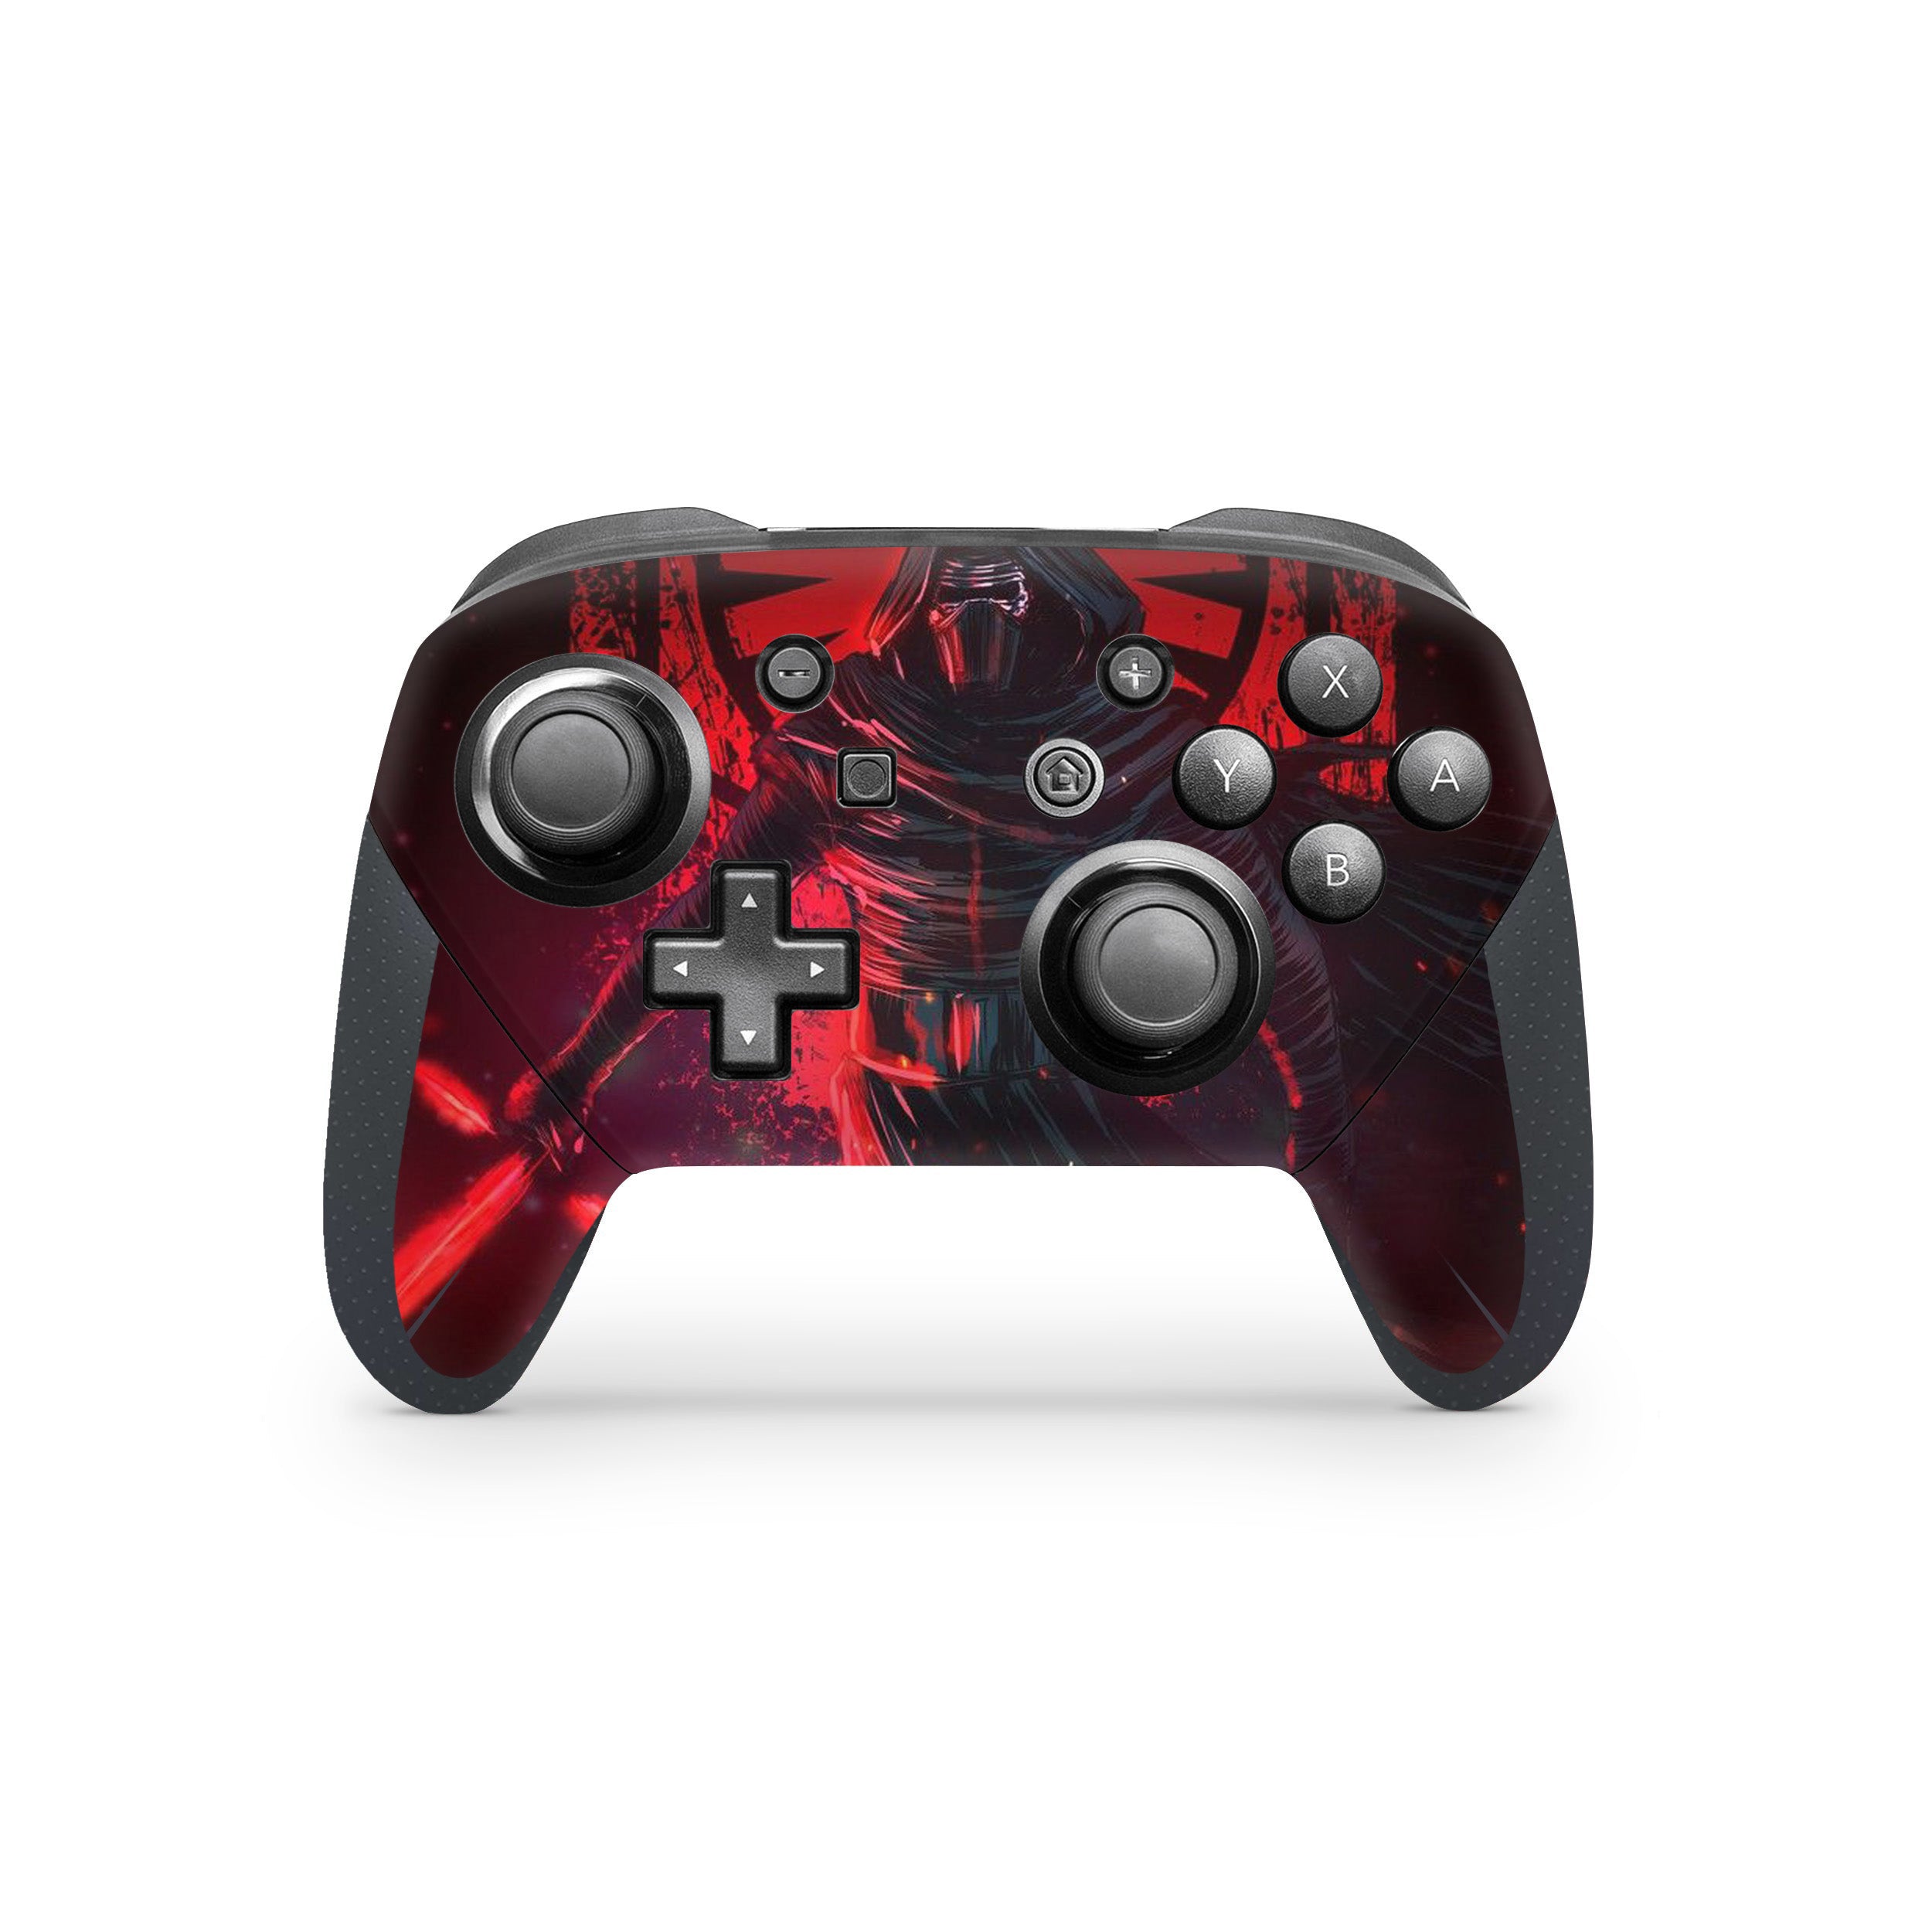 A video game skin featuring a Star Wars Kylo Ren design for the Switch Pro Controller.